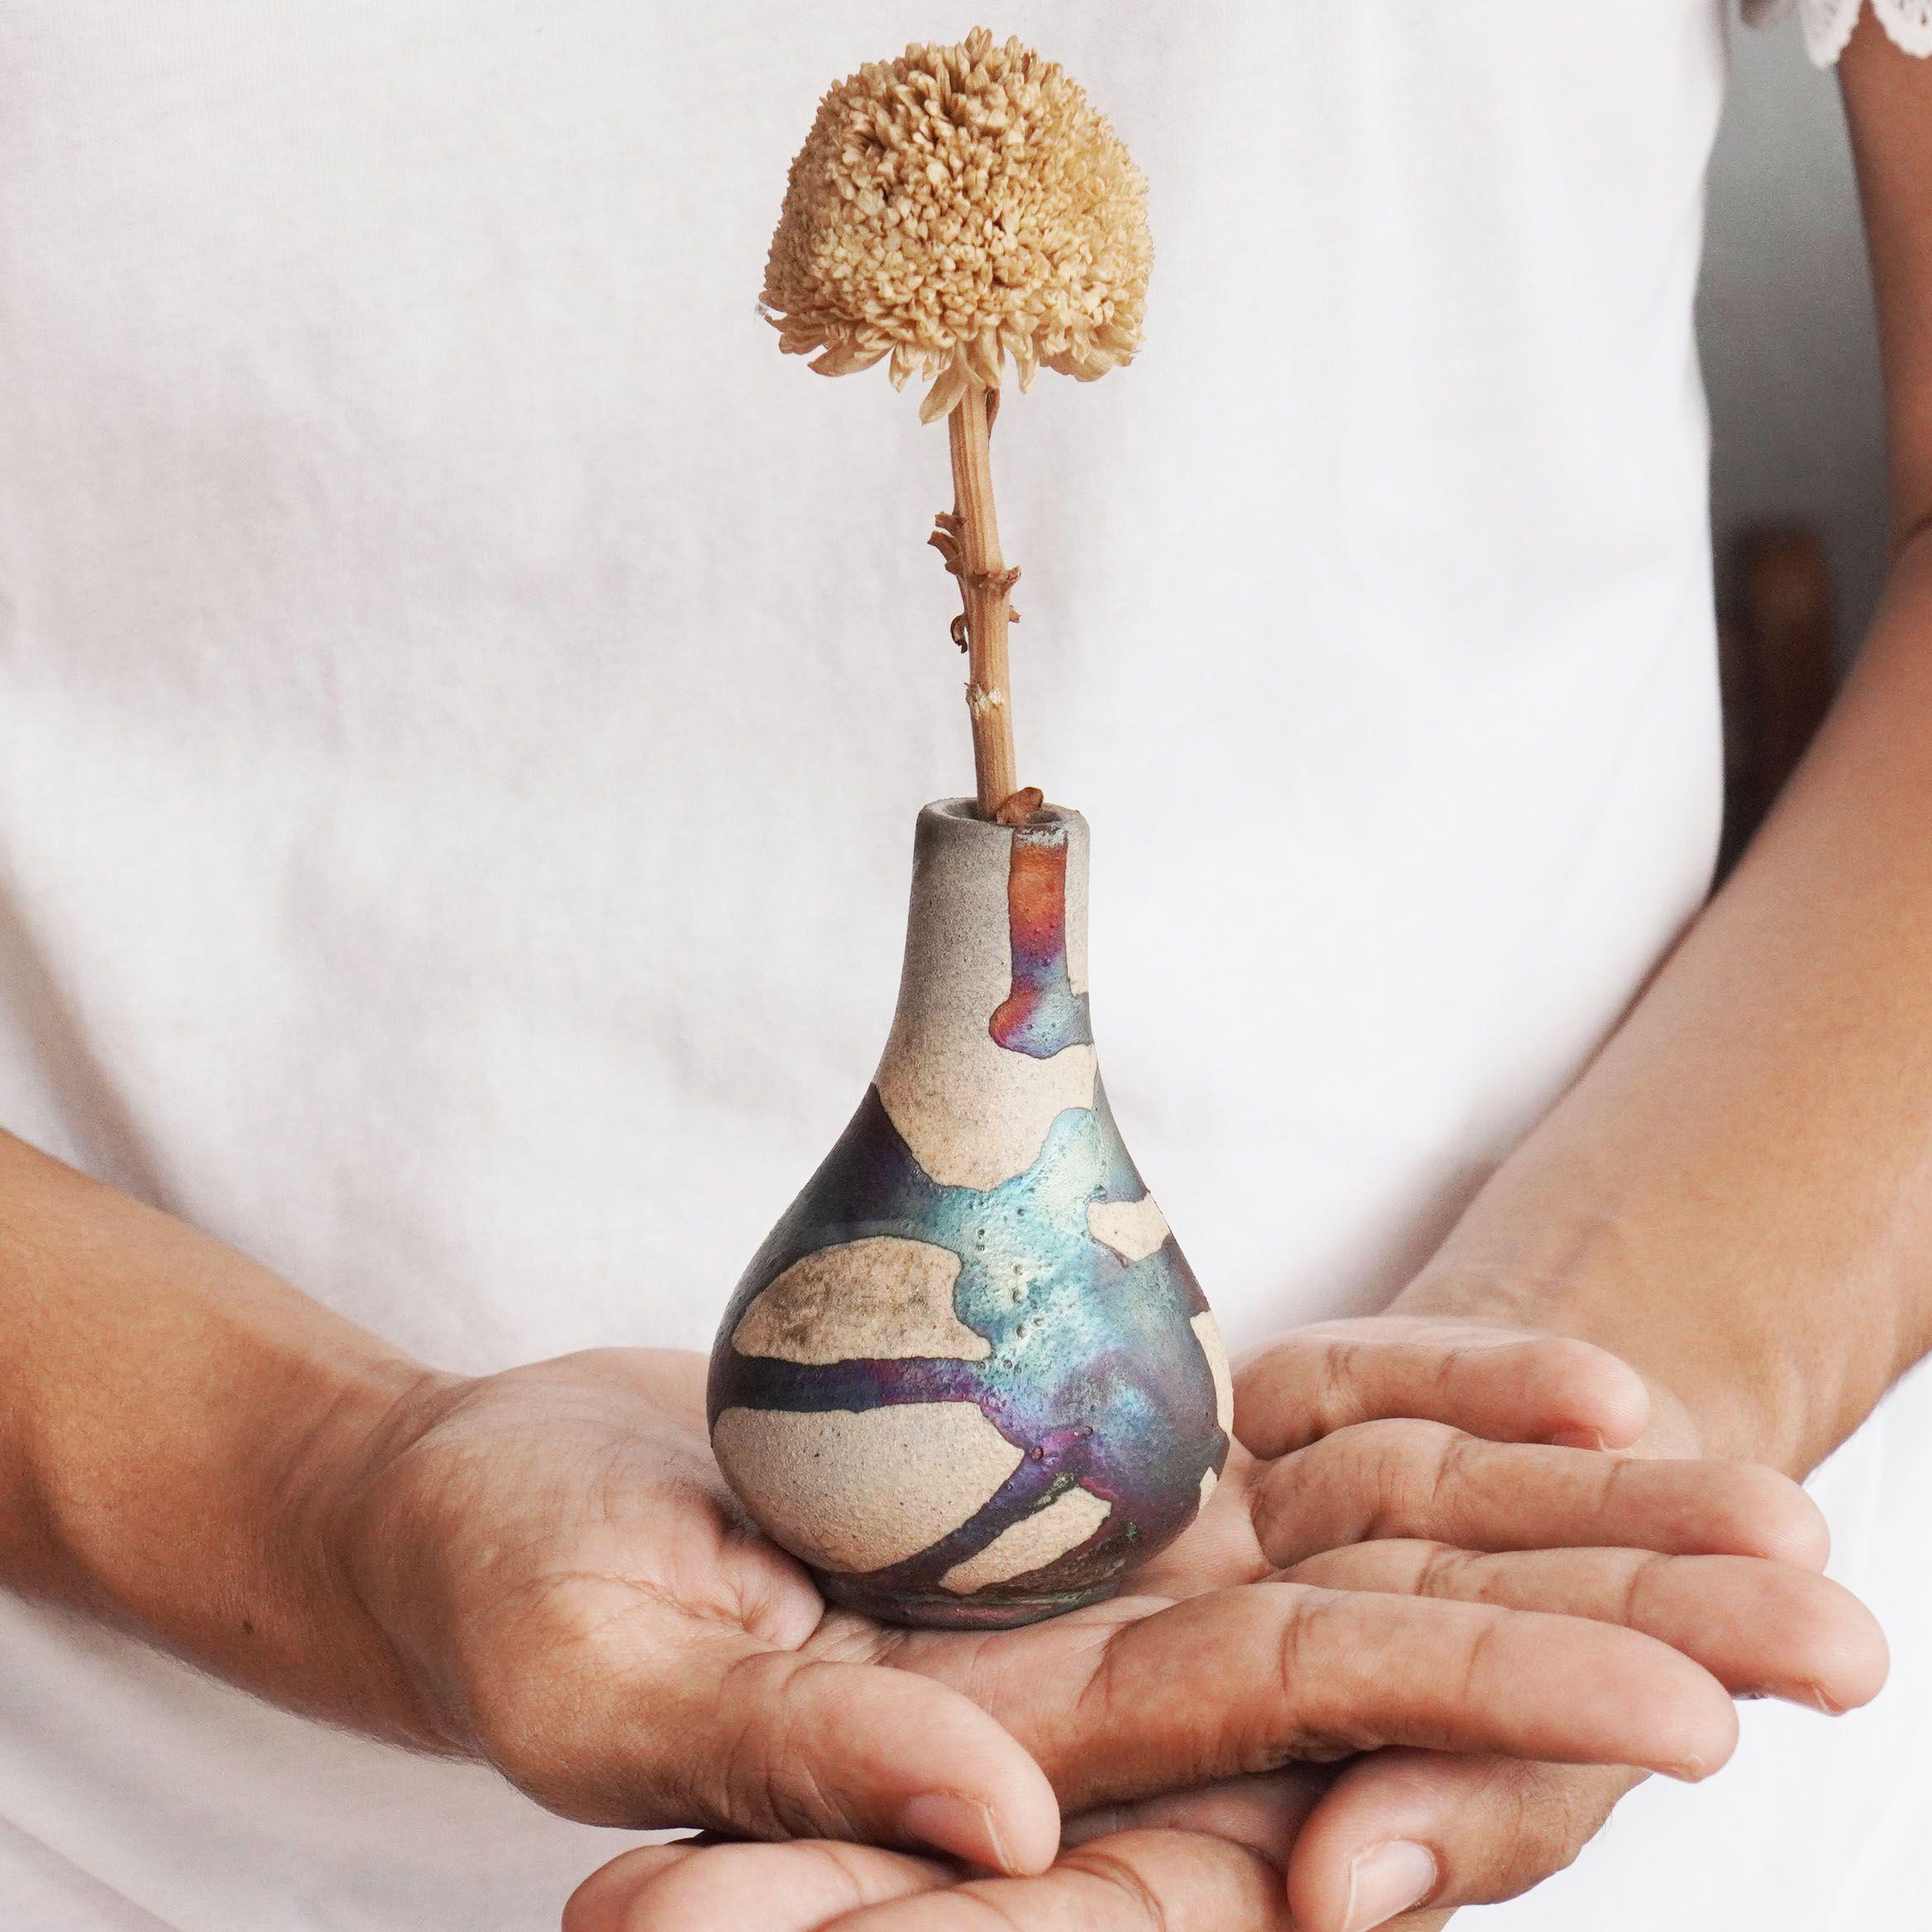 Hana W ~ 花 Flower 

Our Hana W mini raku vase is an expression of a classical vase shape in a miniature form. This vase makes for an adorable gift or a tabletop decorative piece that truly stands out. Each piece is individually finished using the